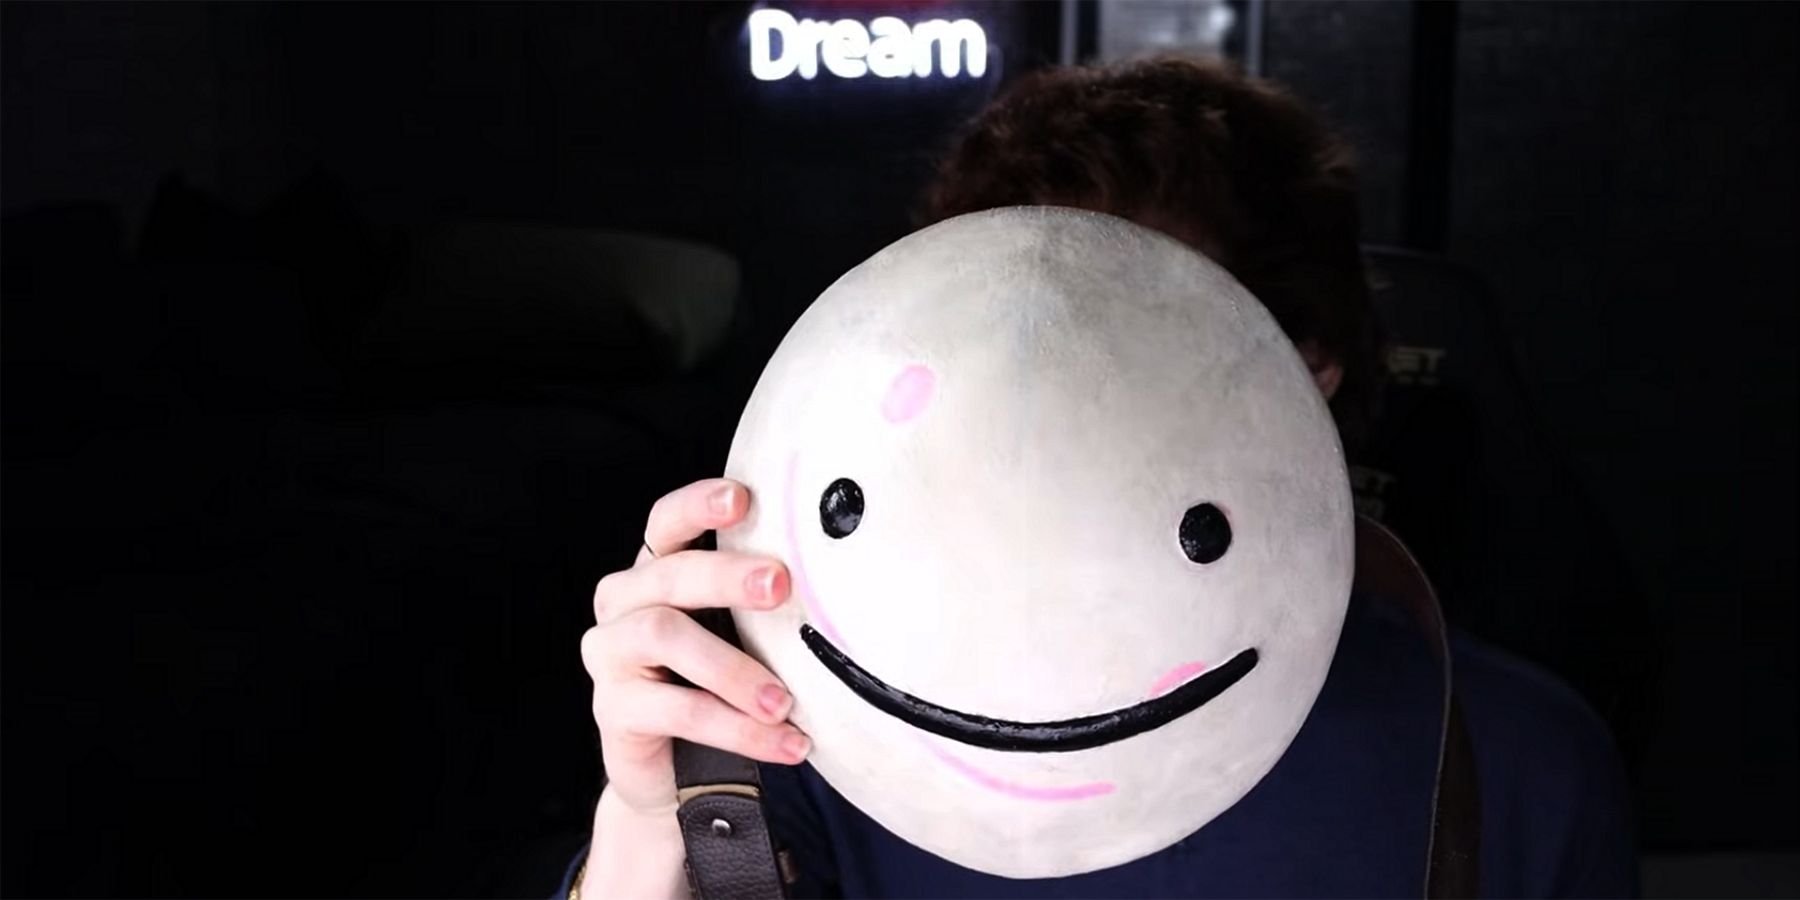 youtuber dream holding smiley face mask before face reveal